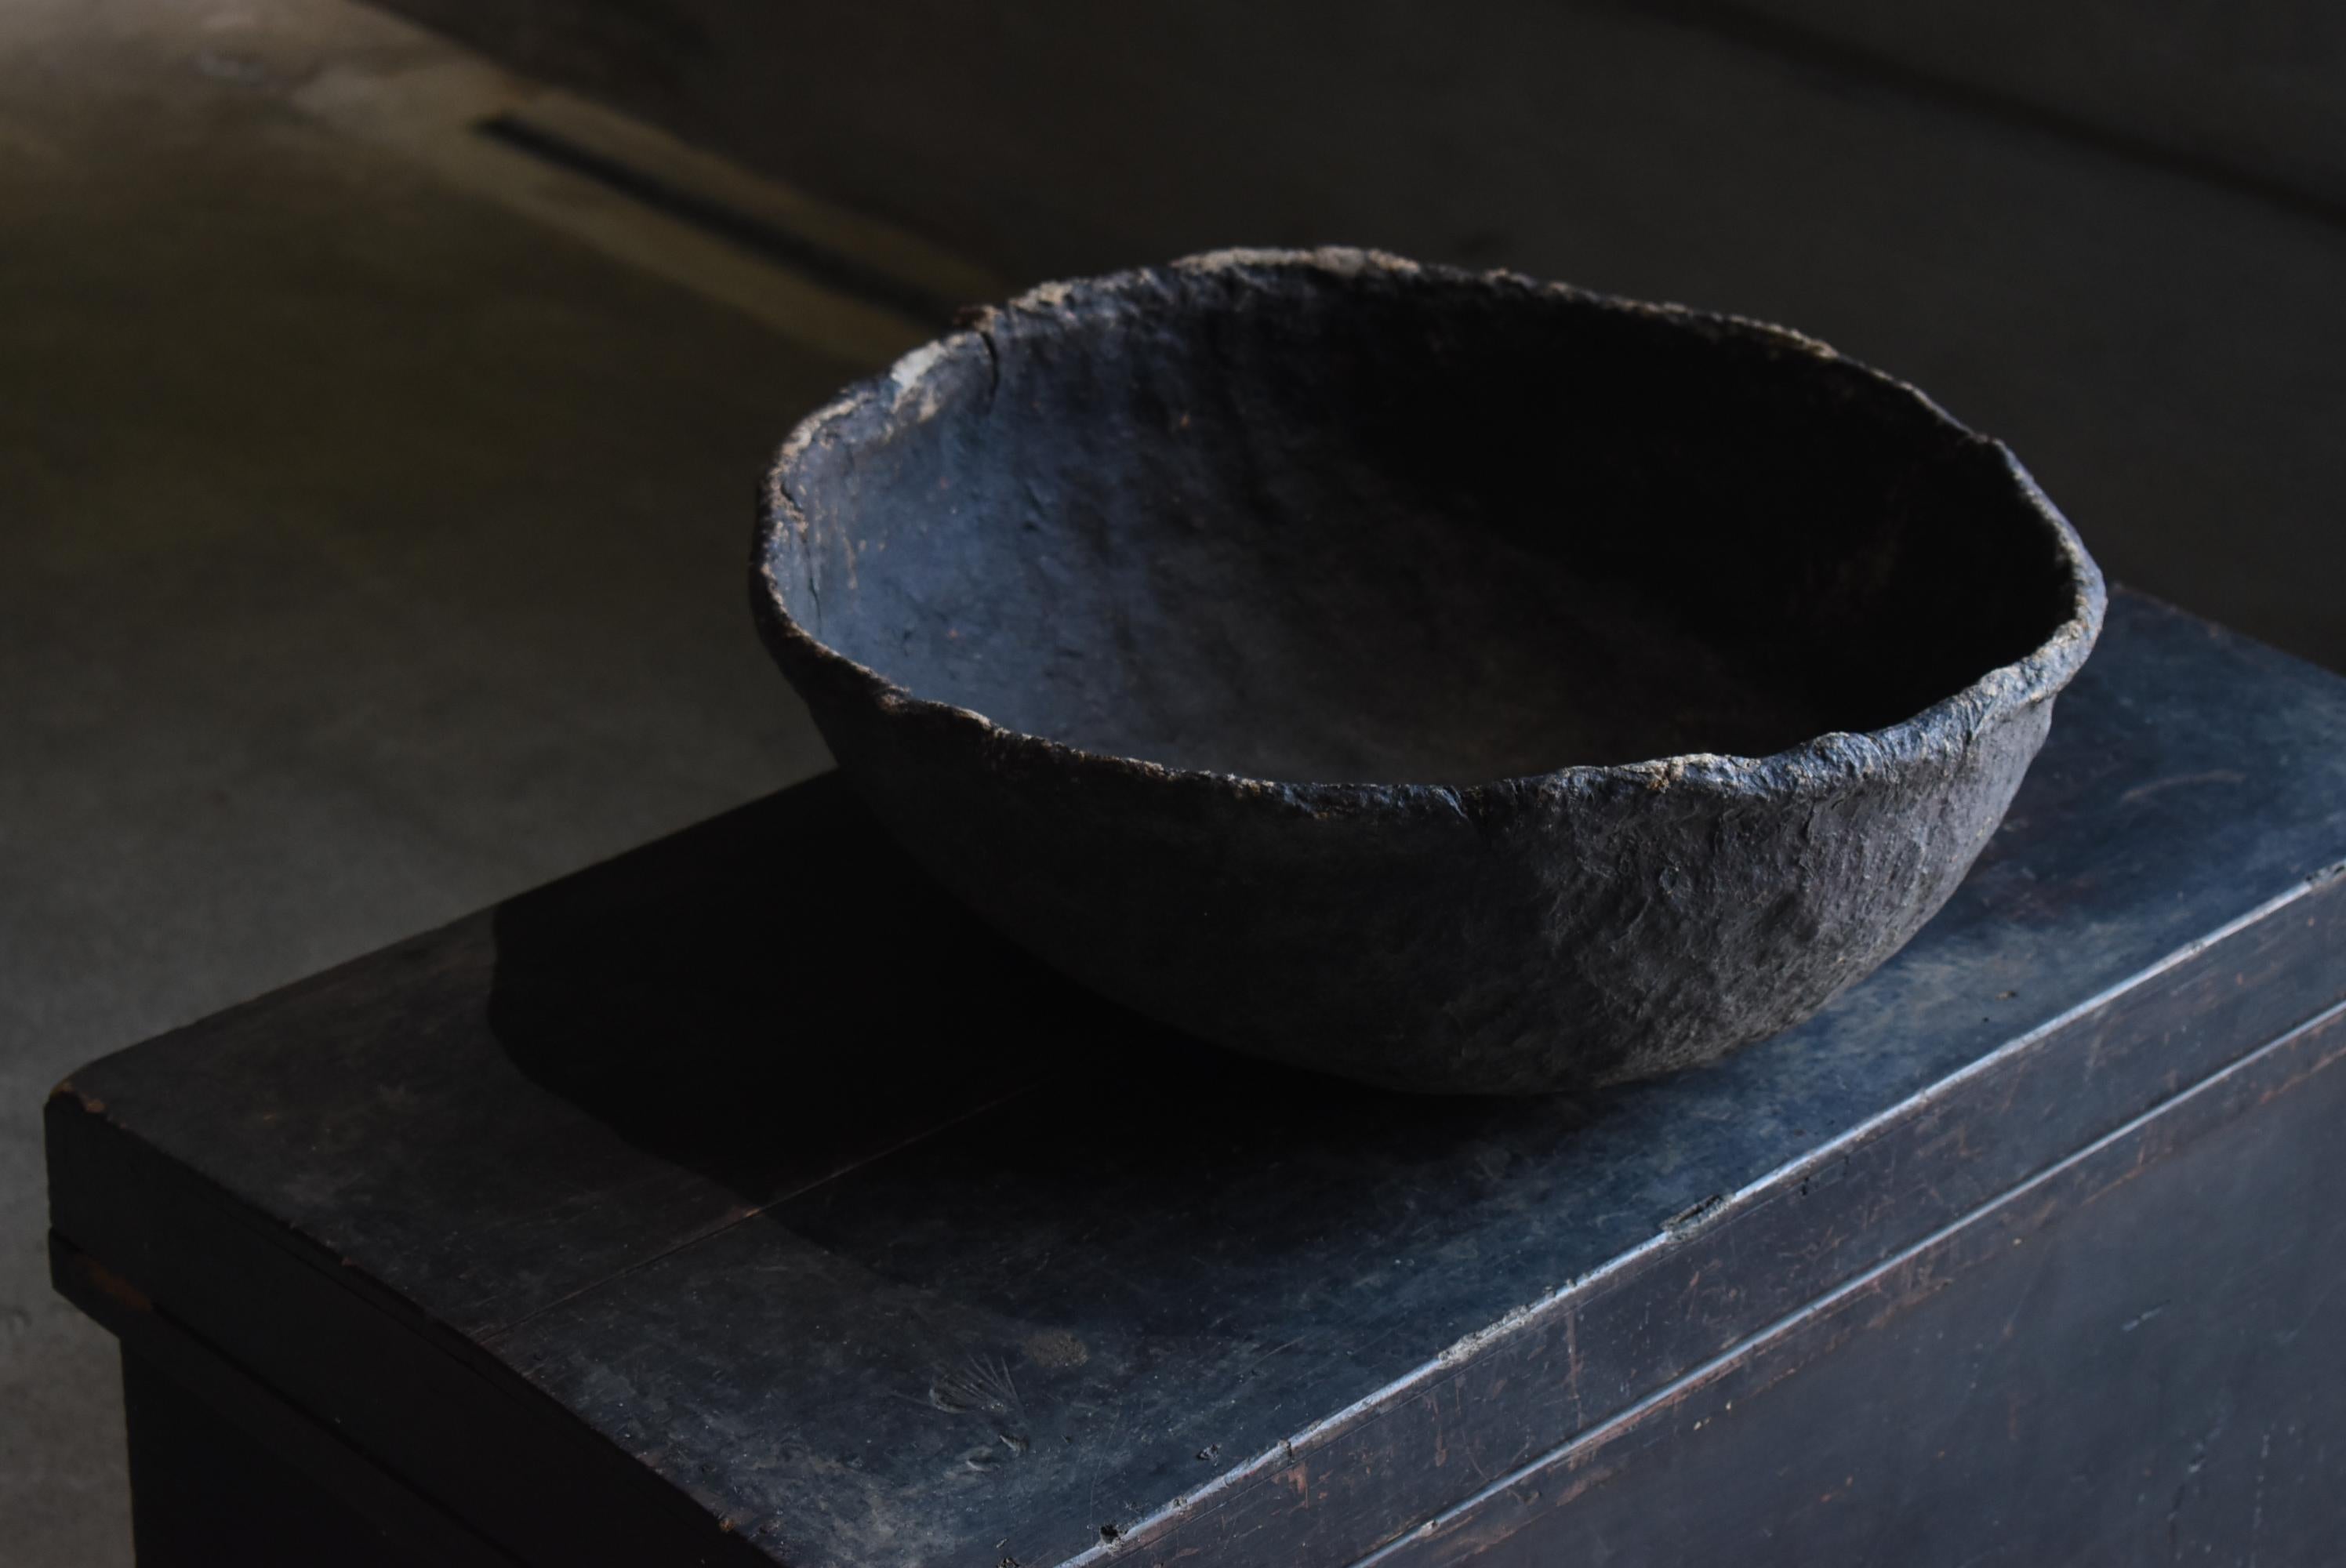 This is a very old Japanese hemp bowl.
It is from the Meiji period (1860s-1920s).

It is one of the daily utensils used in certain areas of Japan.
It is used to hold grains and other items.

It is made by beating well the scraps of hemp after